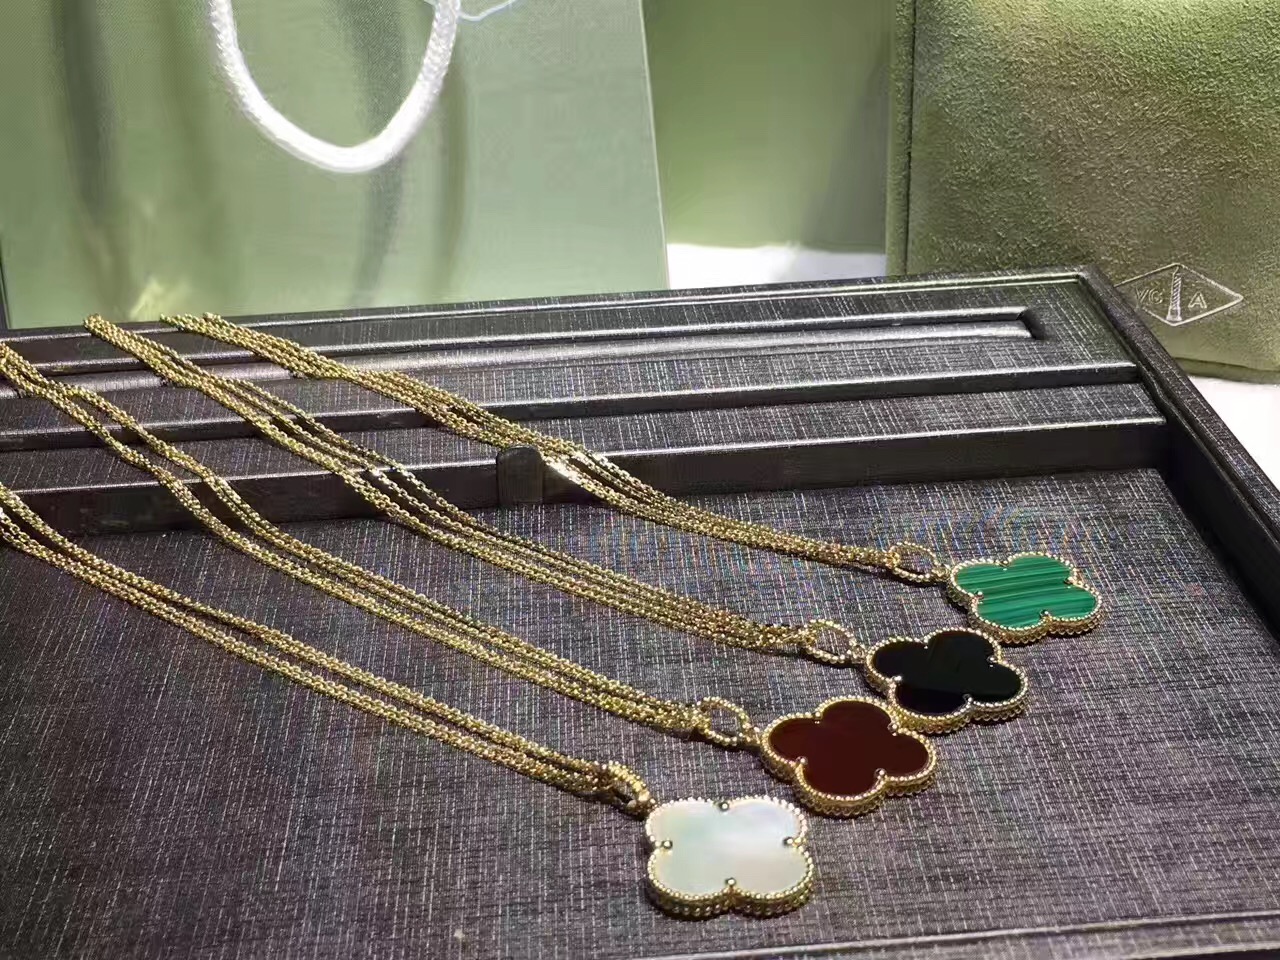 How to Spot a Fake Van Cleef & Arpels Alhambra Jewelry